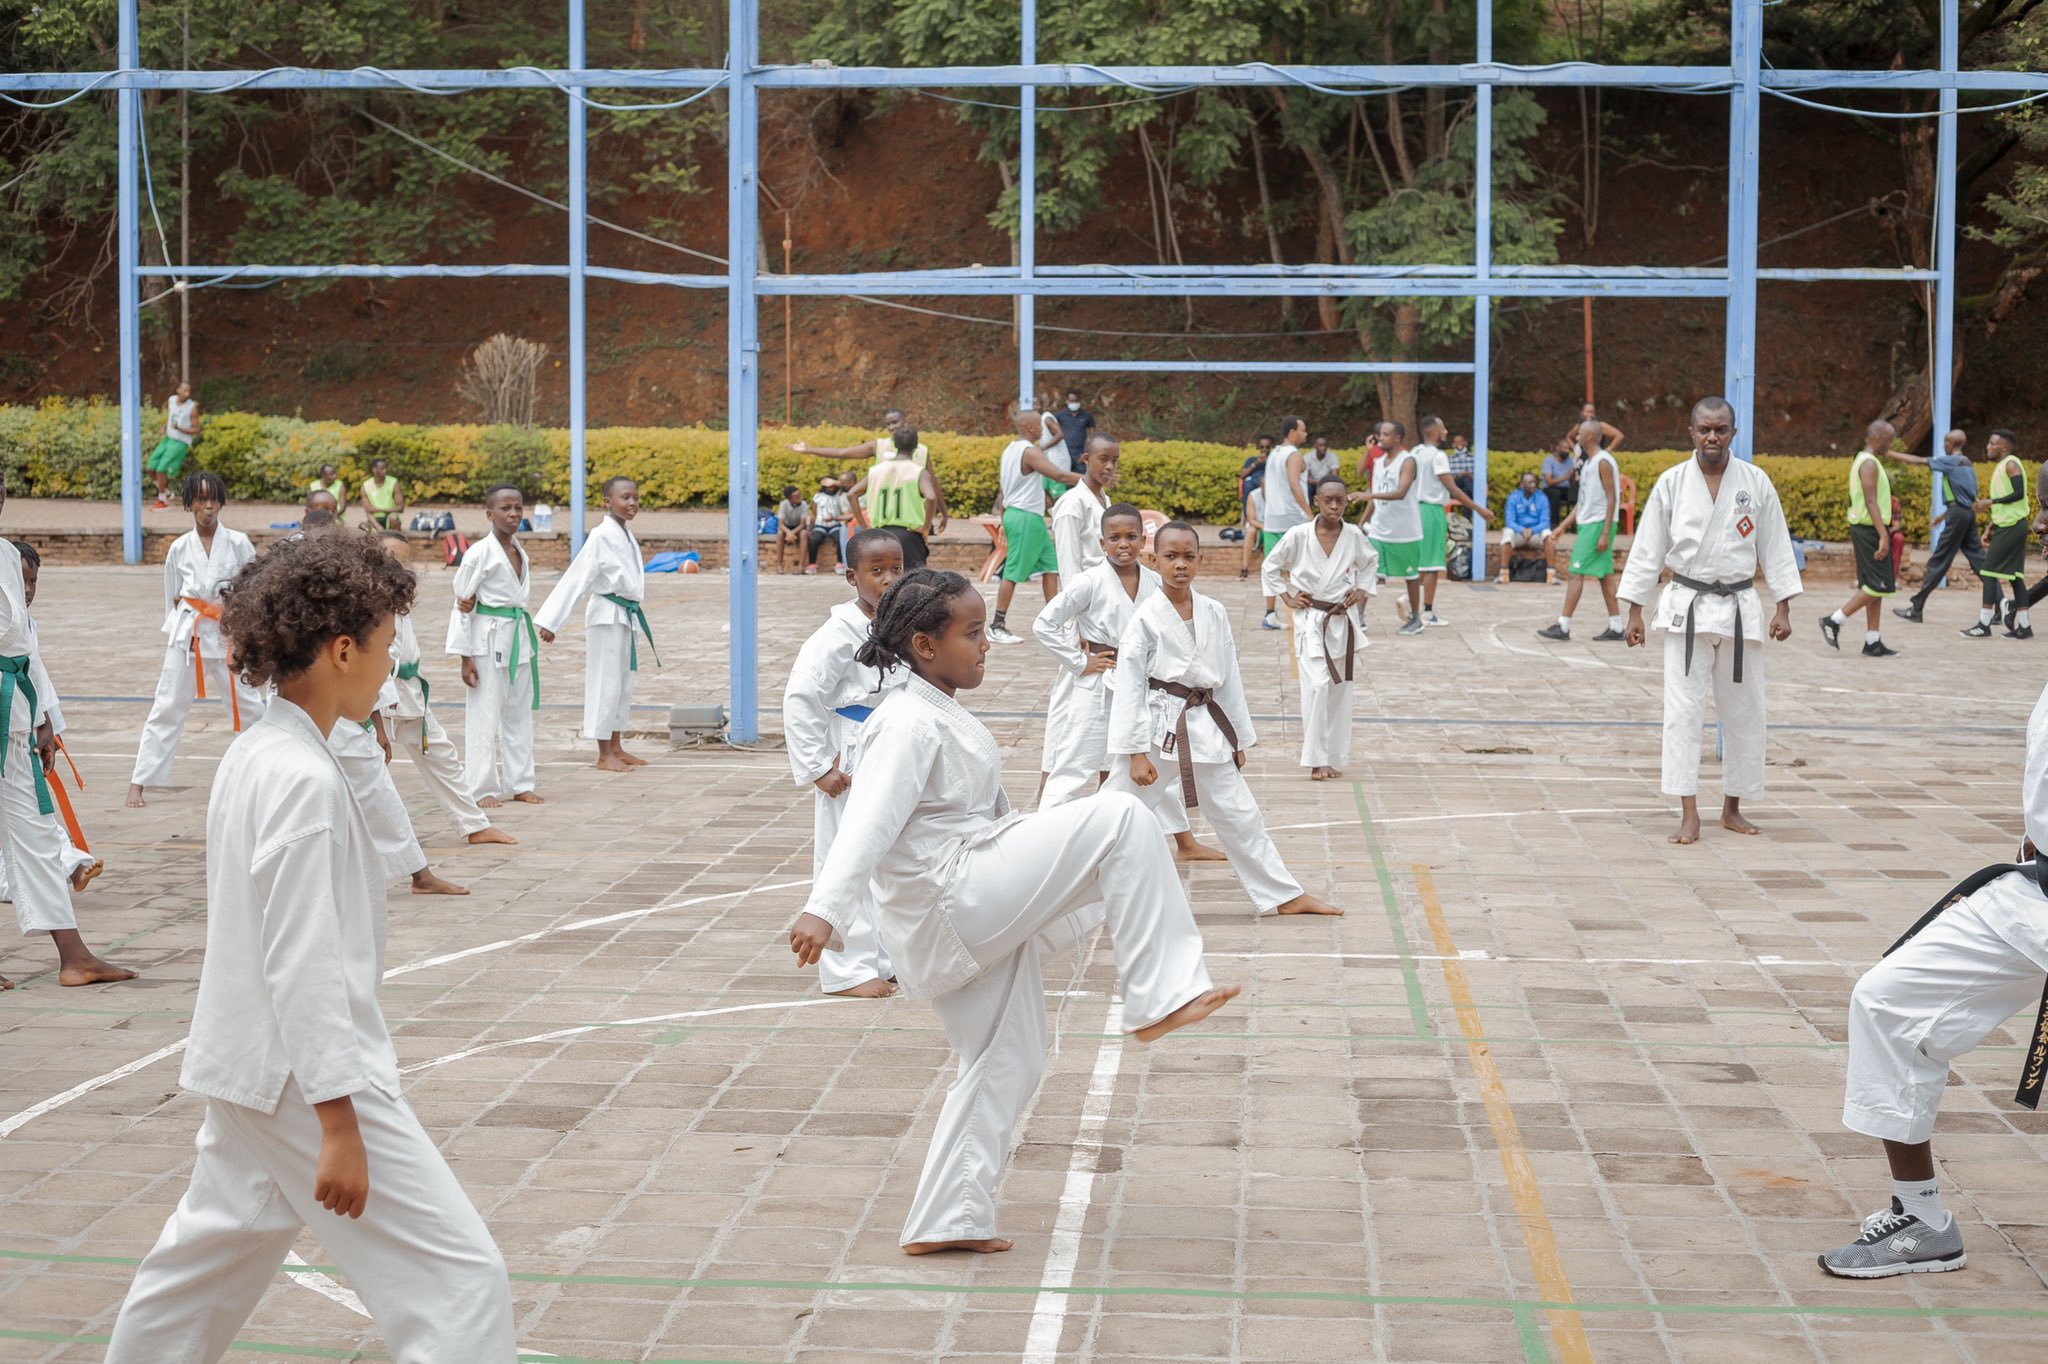 Sports Genix International academy launched with 90 children in January. The youngsters are trained in karate, football and basketball. Net photo.